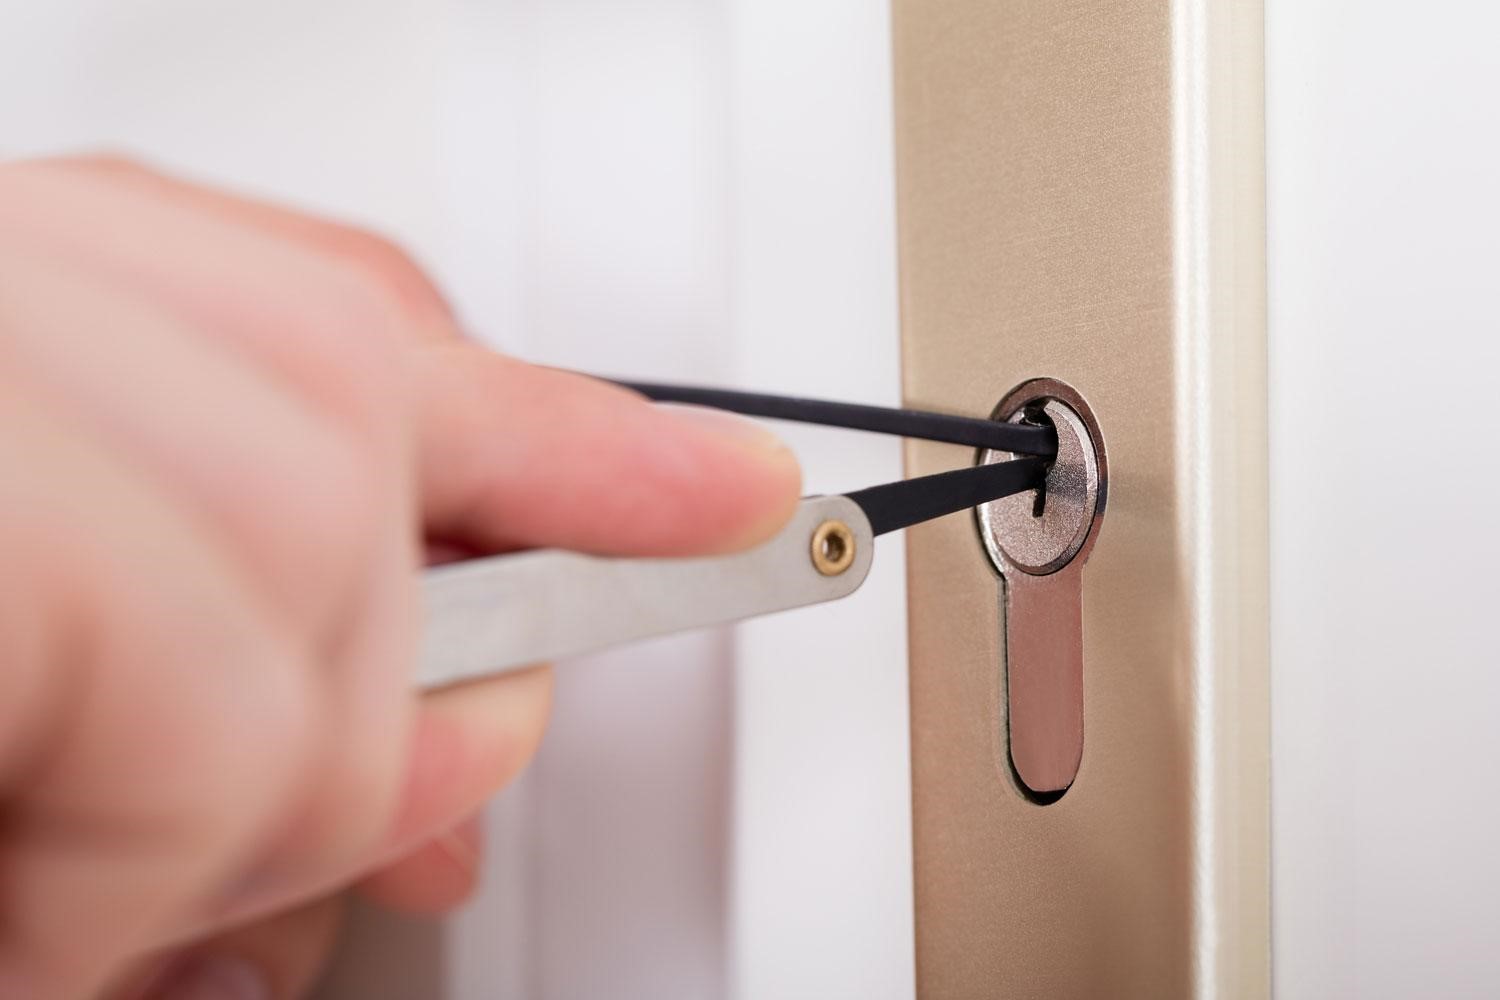 How To Open My Door Lock Without A Key